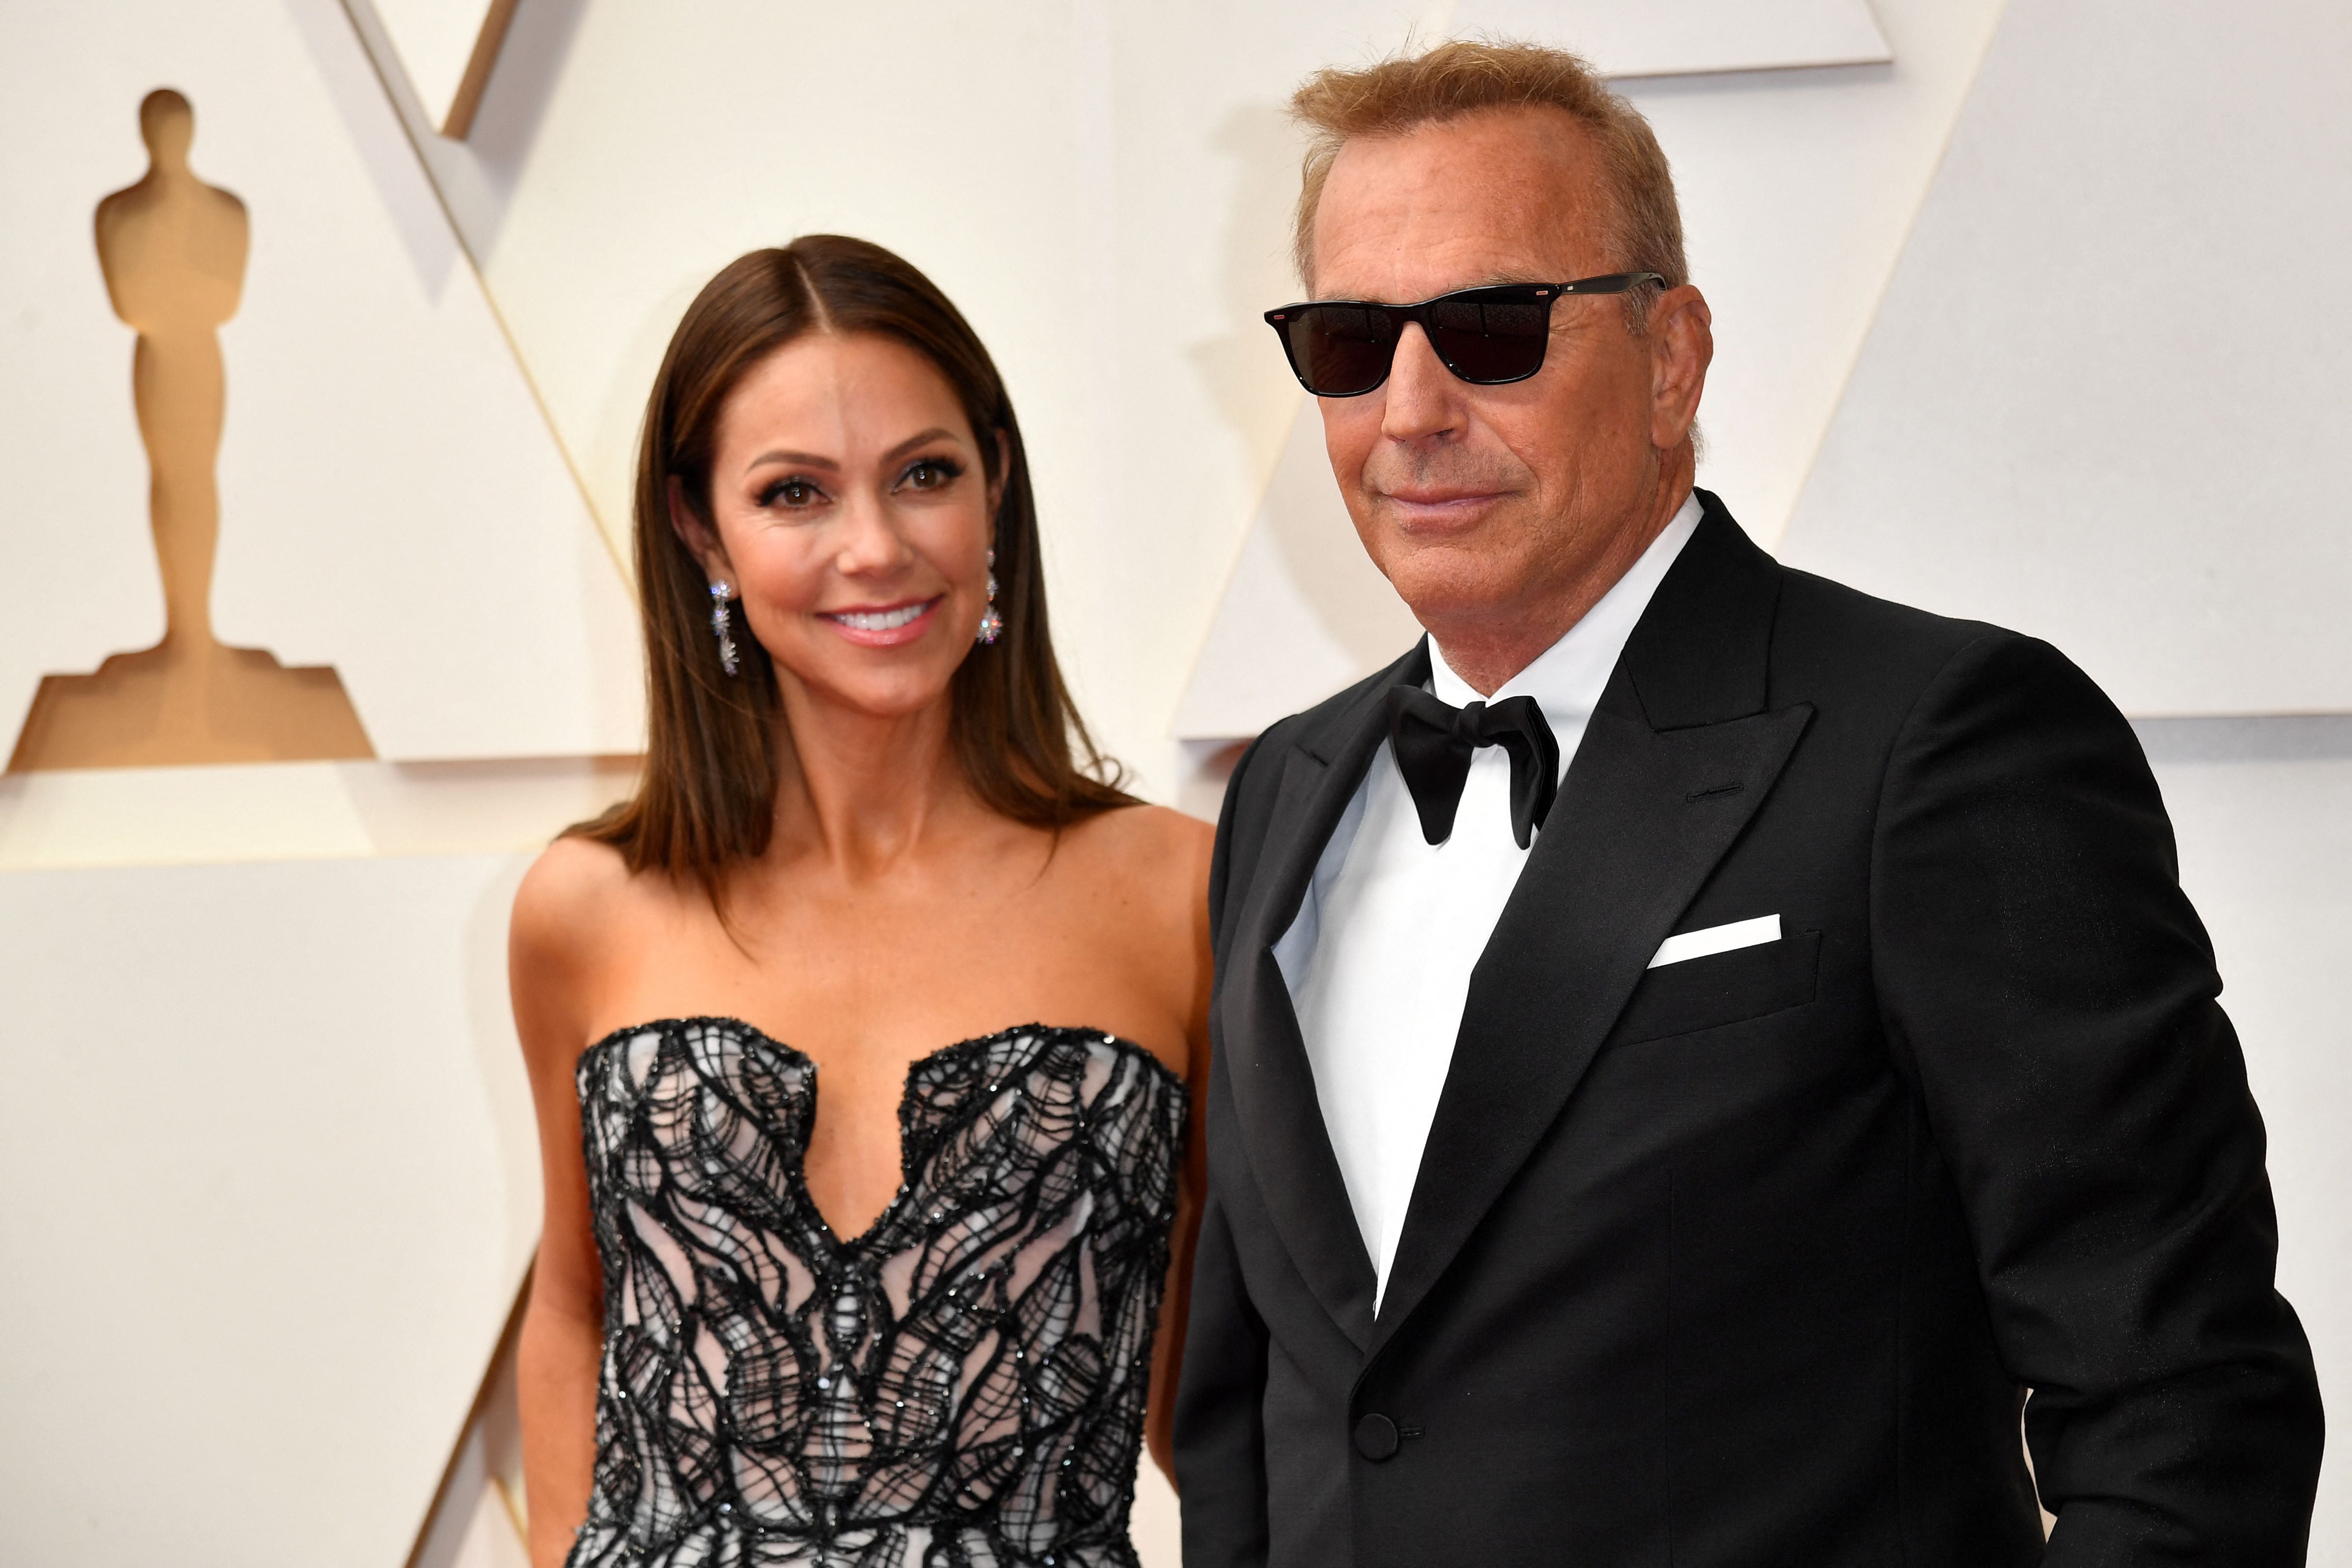 Kevin Costner and his wife Christine Baumgartner at the Oscars in 2022